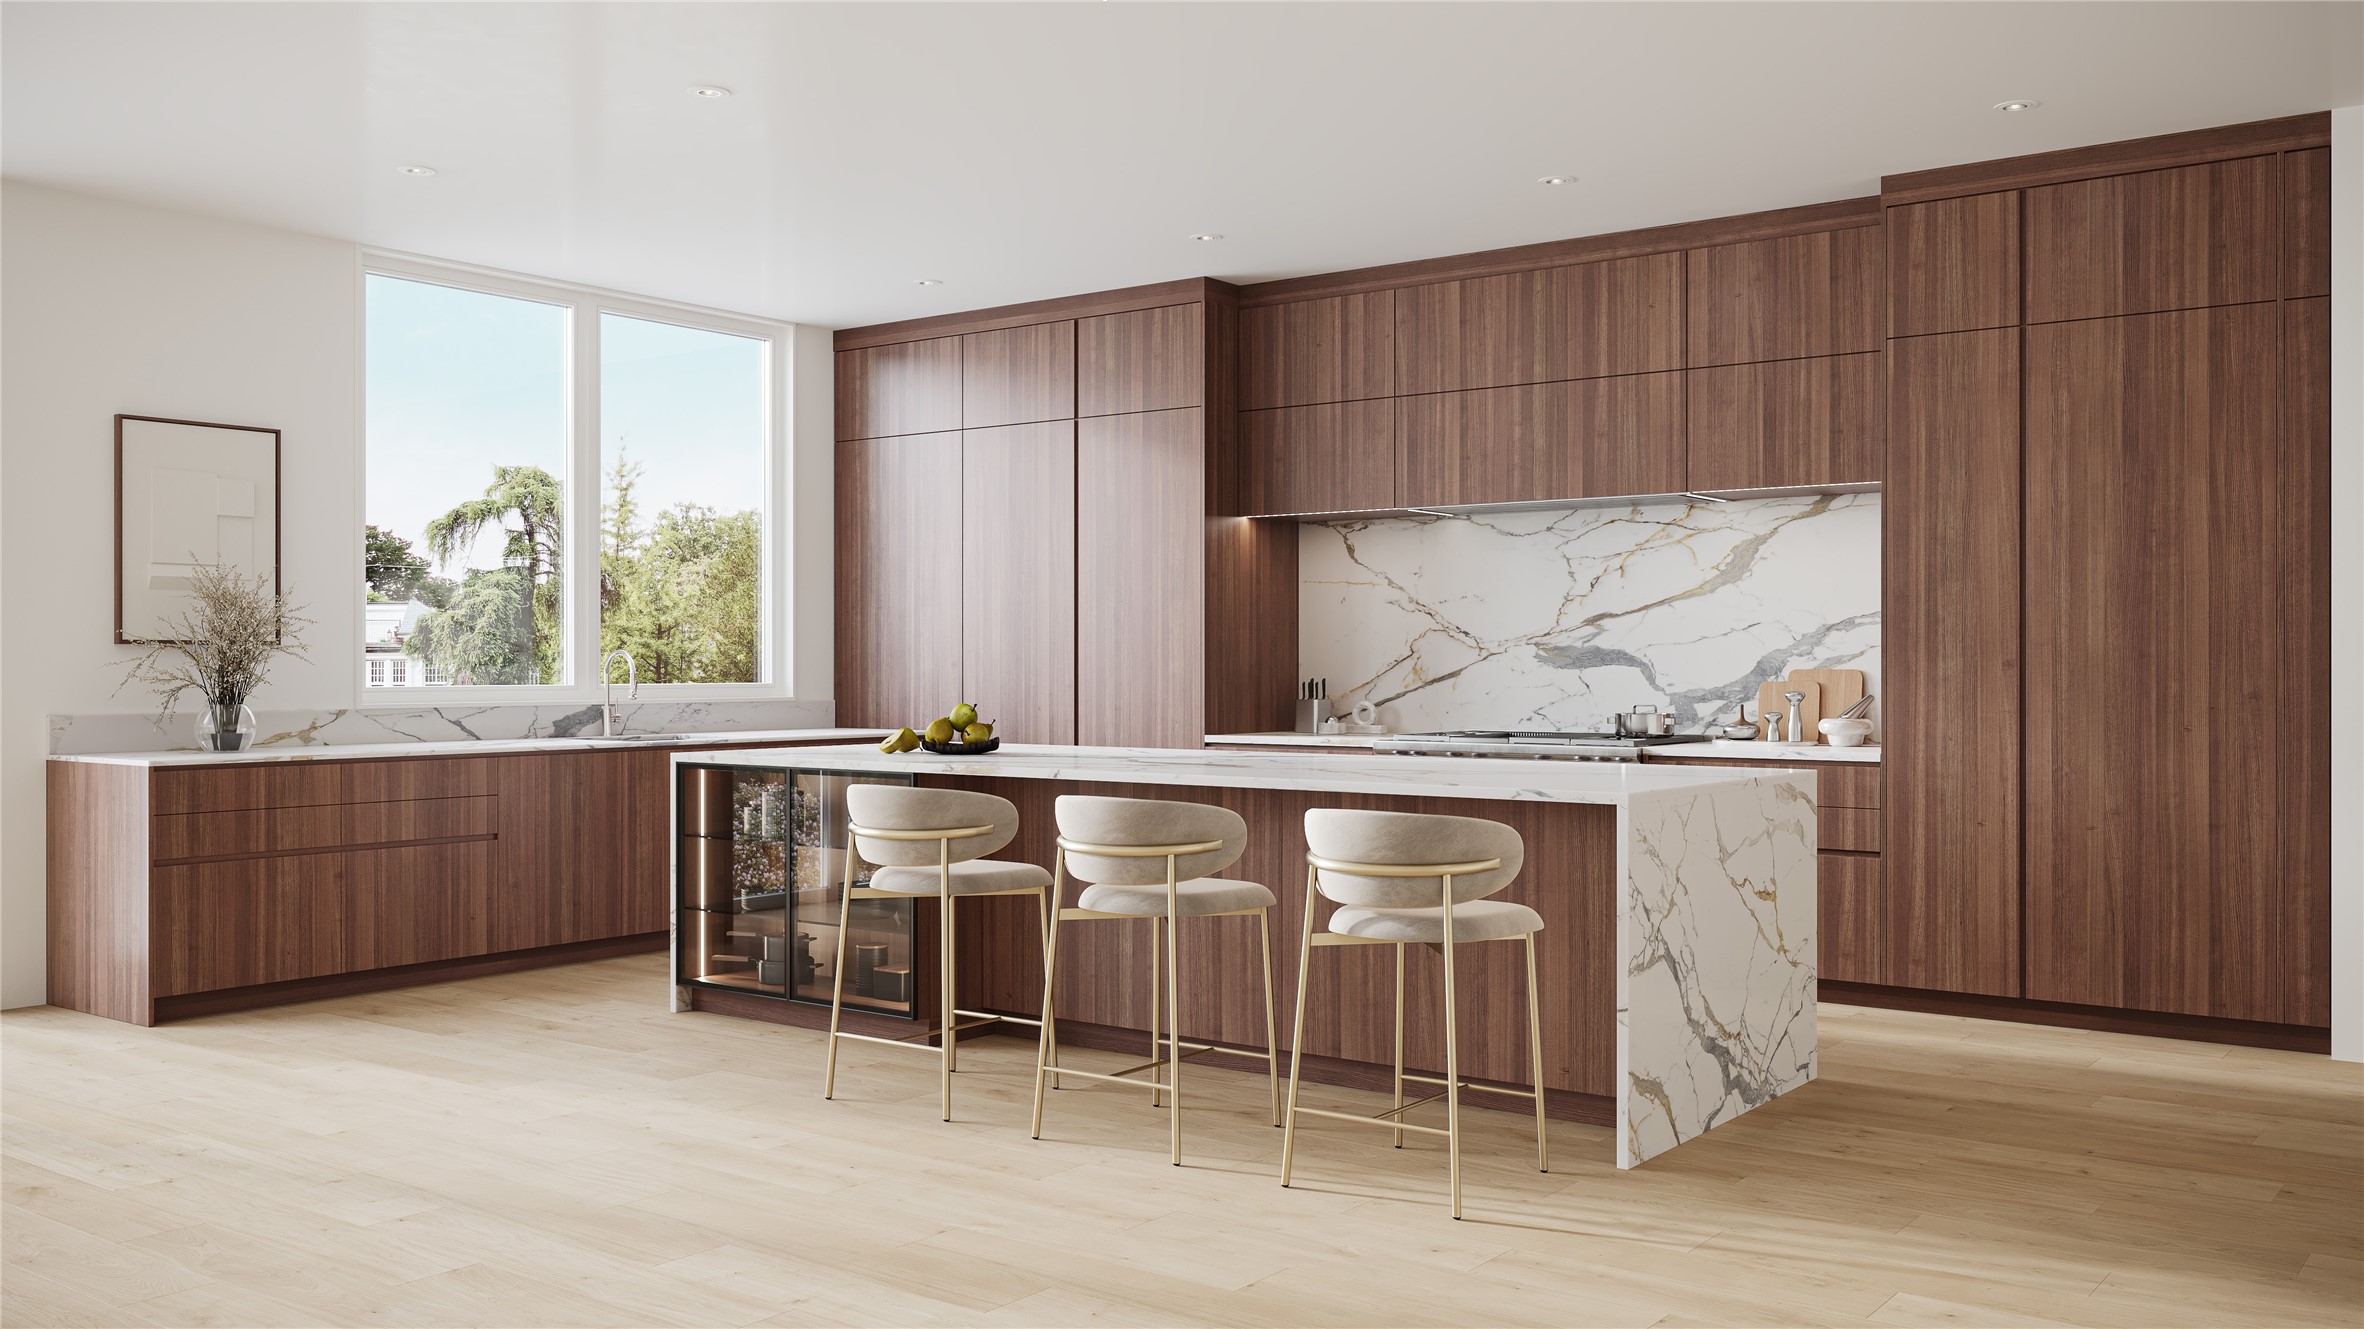 Artist Rendition of the homes Kitchen that opens the homes living & dining areas. The kitchen is replete with top tier Thermador appliances (all paneled of course). Waterfall edge stone finishes & custom designed Eggersmann cabinetry throughout married by the European Oak flooring.